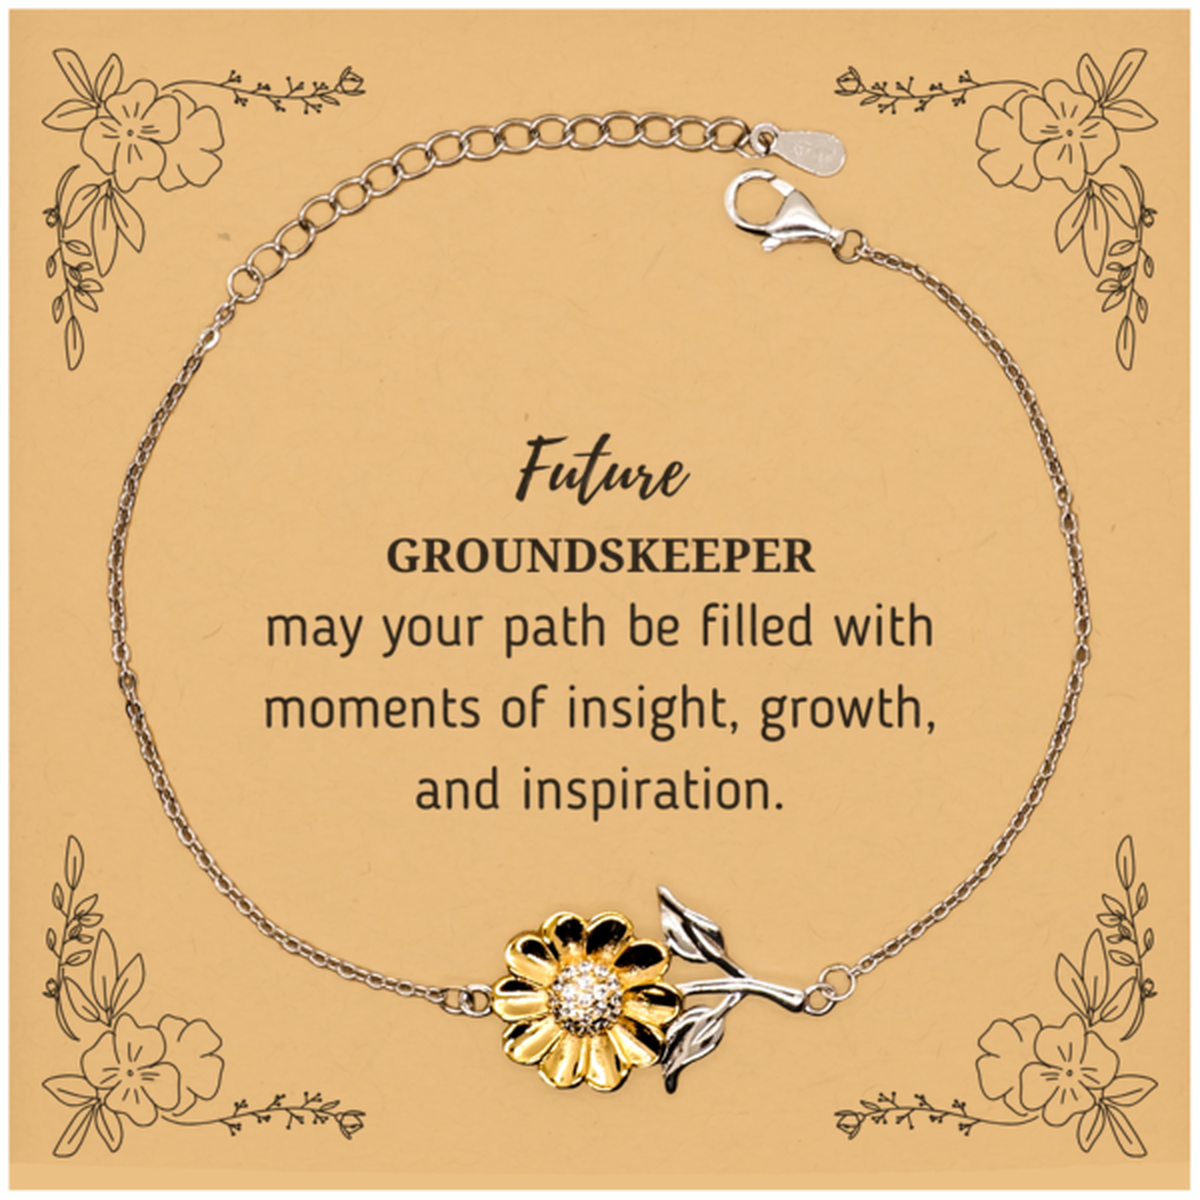 Future Groundskeeper Gifts, May your path be filled with moments of insight, Graduation Gifts for New Groundskeeper, Christmas Unique Sunflower Bracelet For Men, Women, Friends